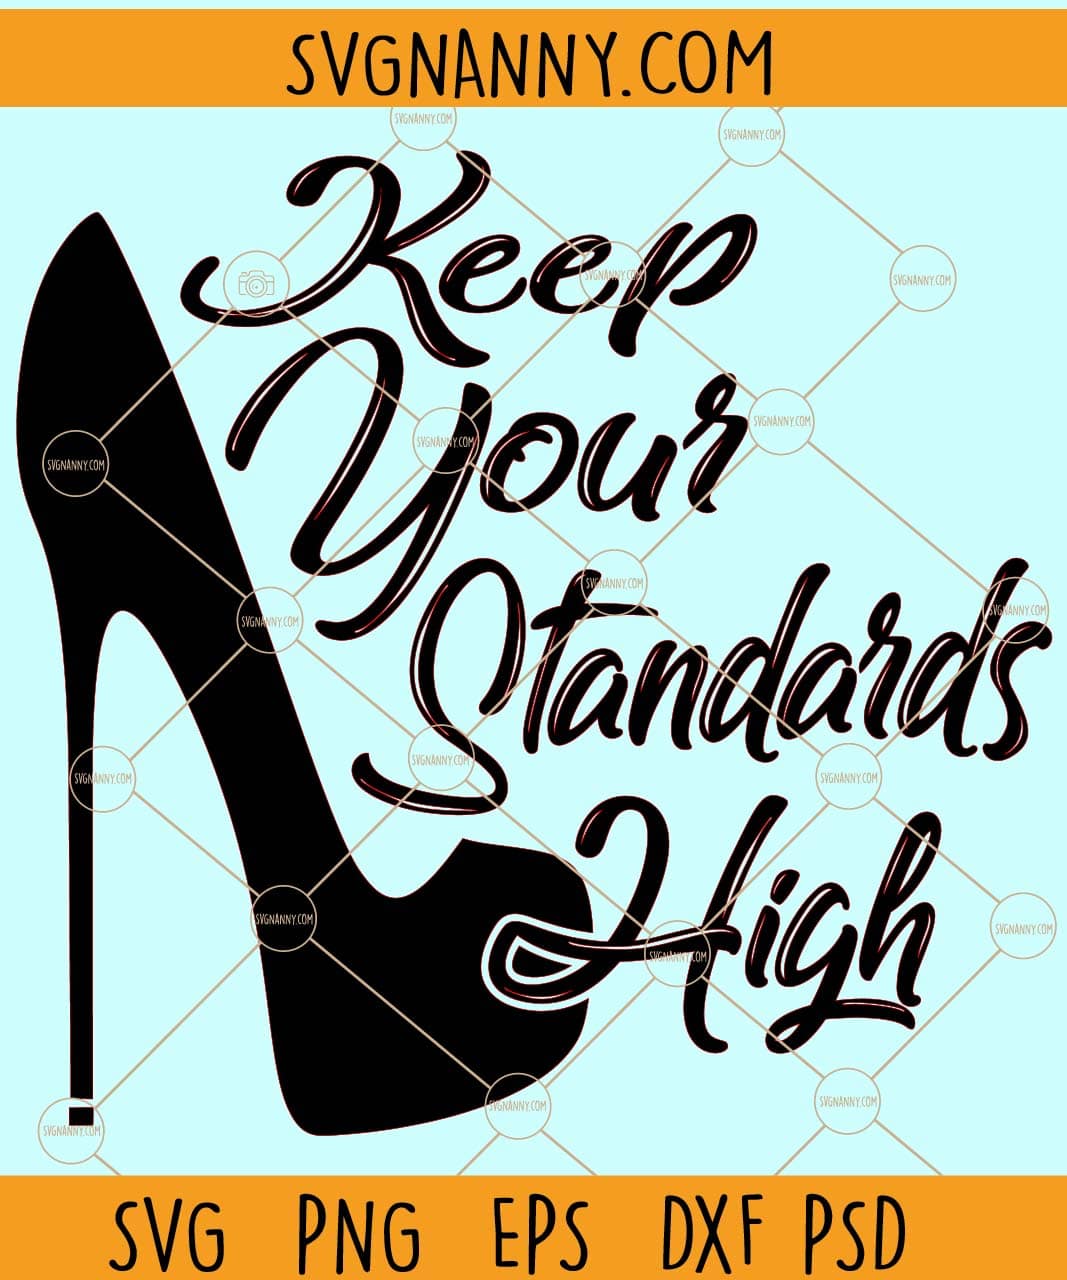 Inspirational svg, your heels, head & standards svg, Coco Chanel